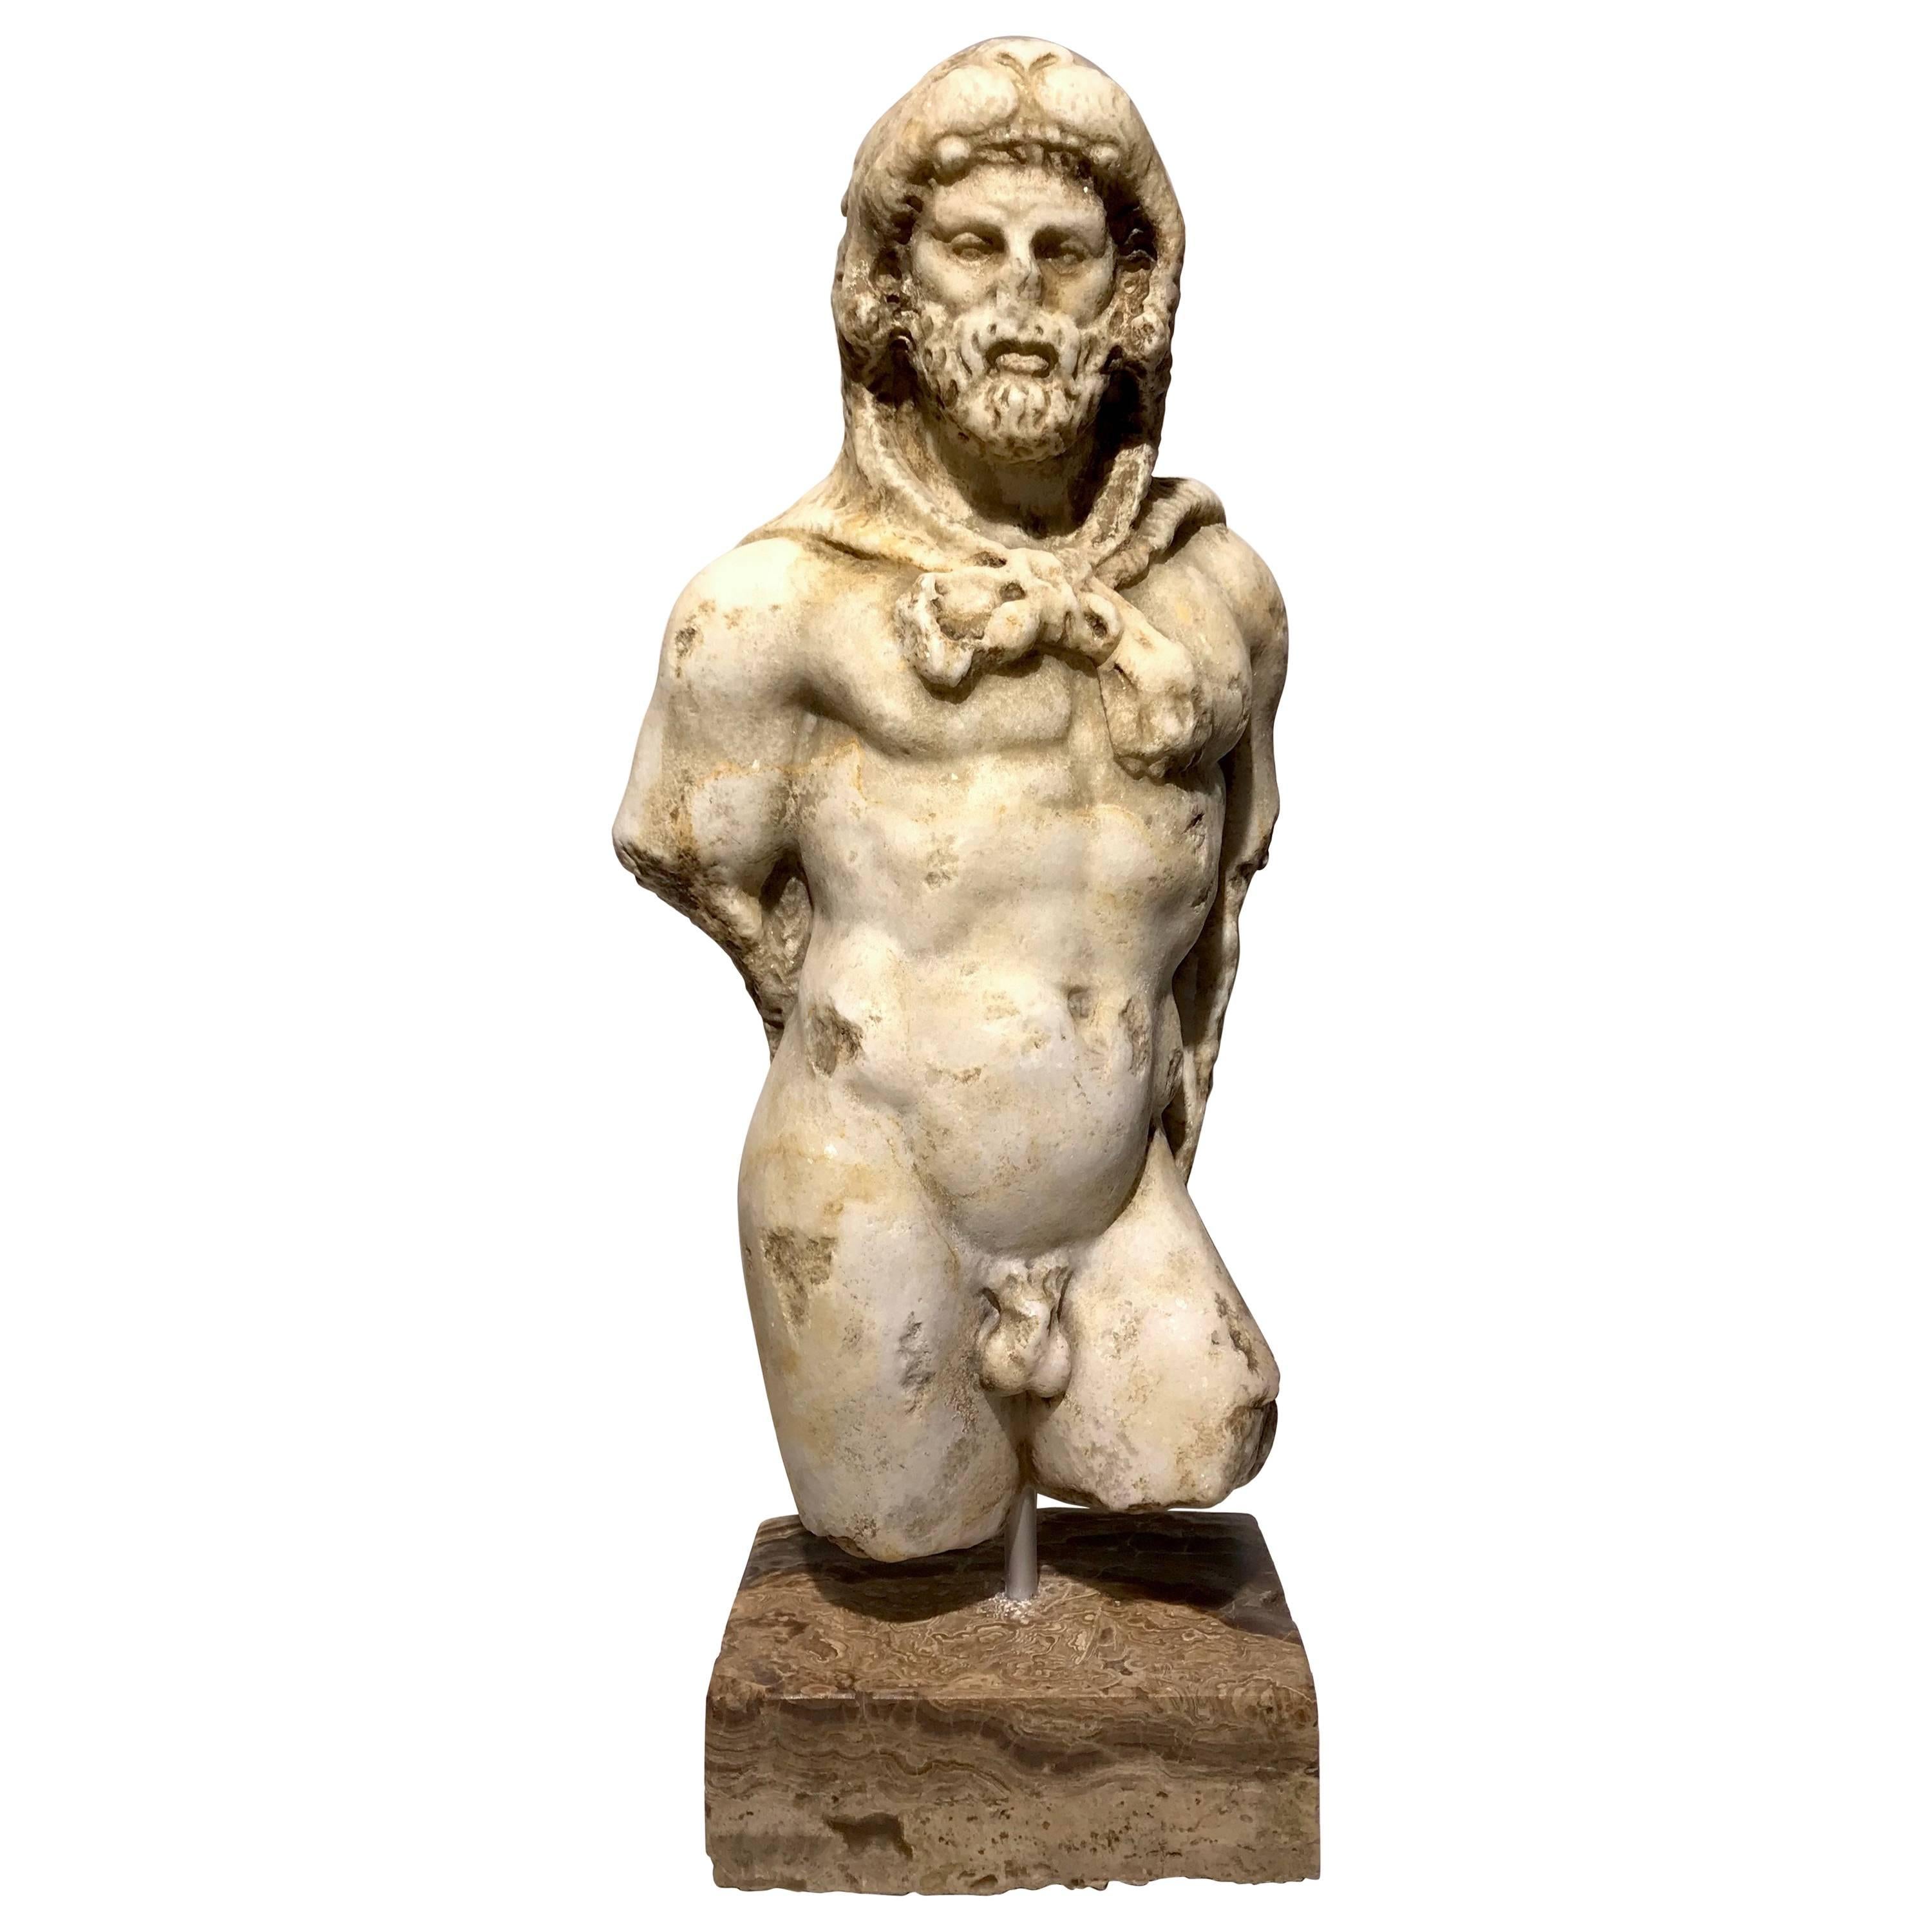 20th Century Classical Roman Marble Sculpture of Emperor Commodus as Hercules